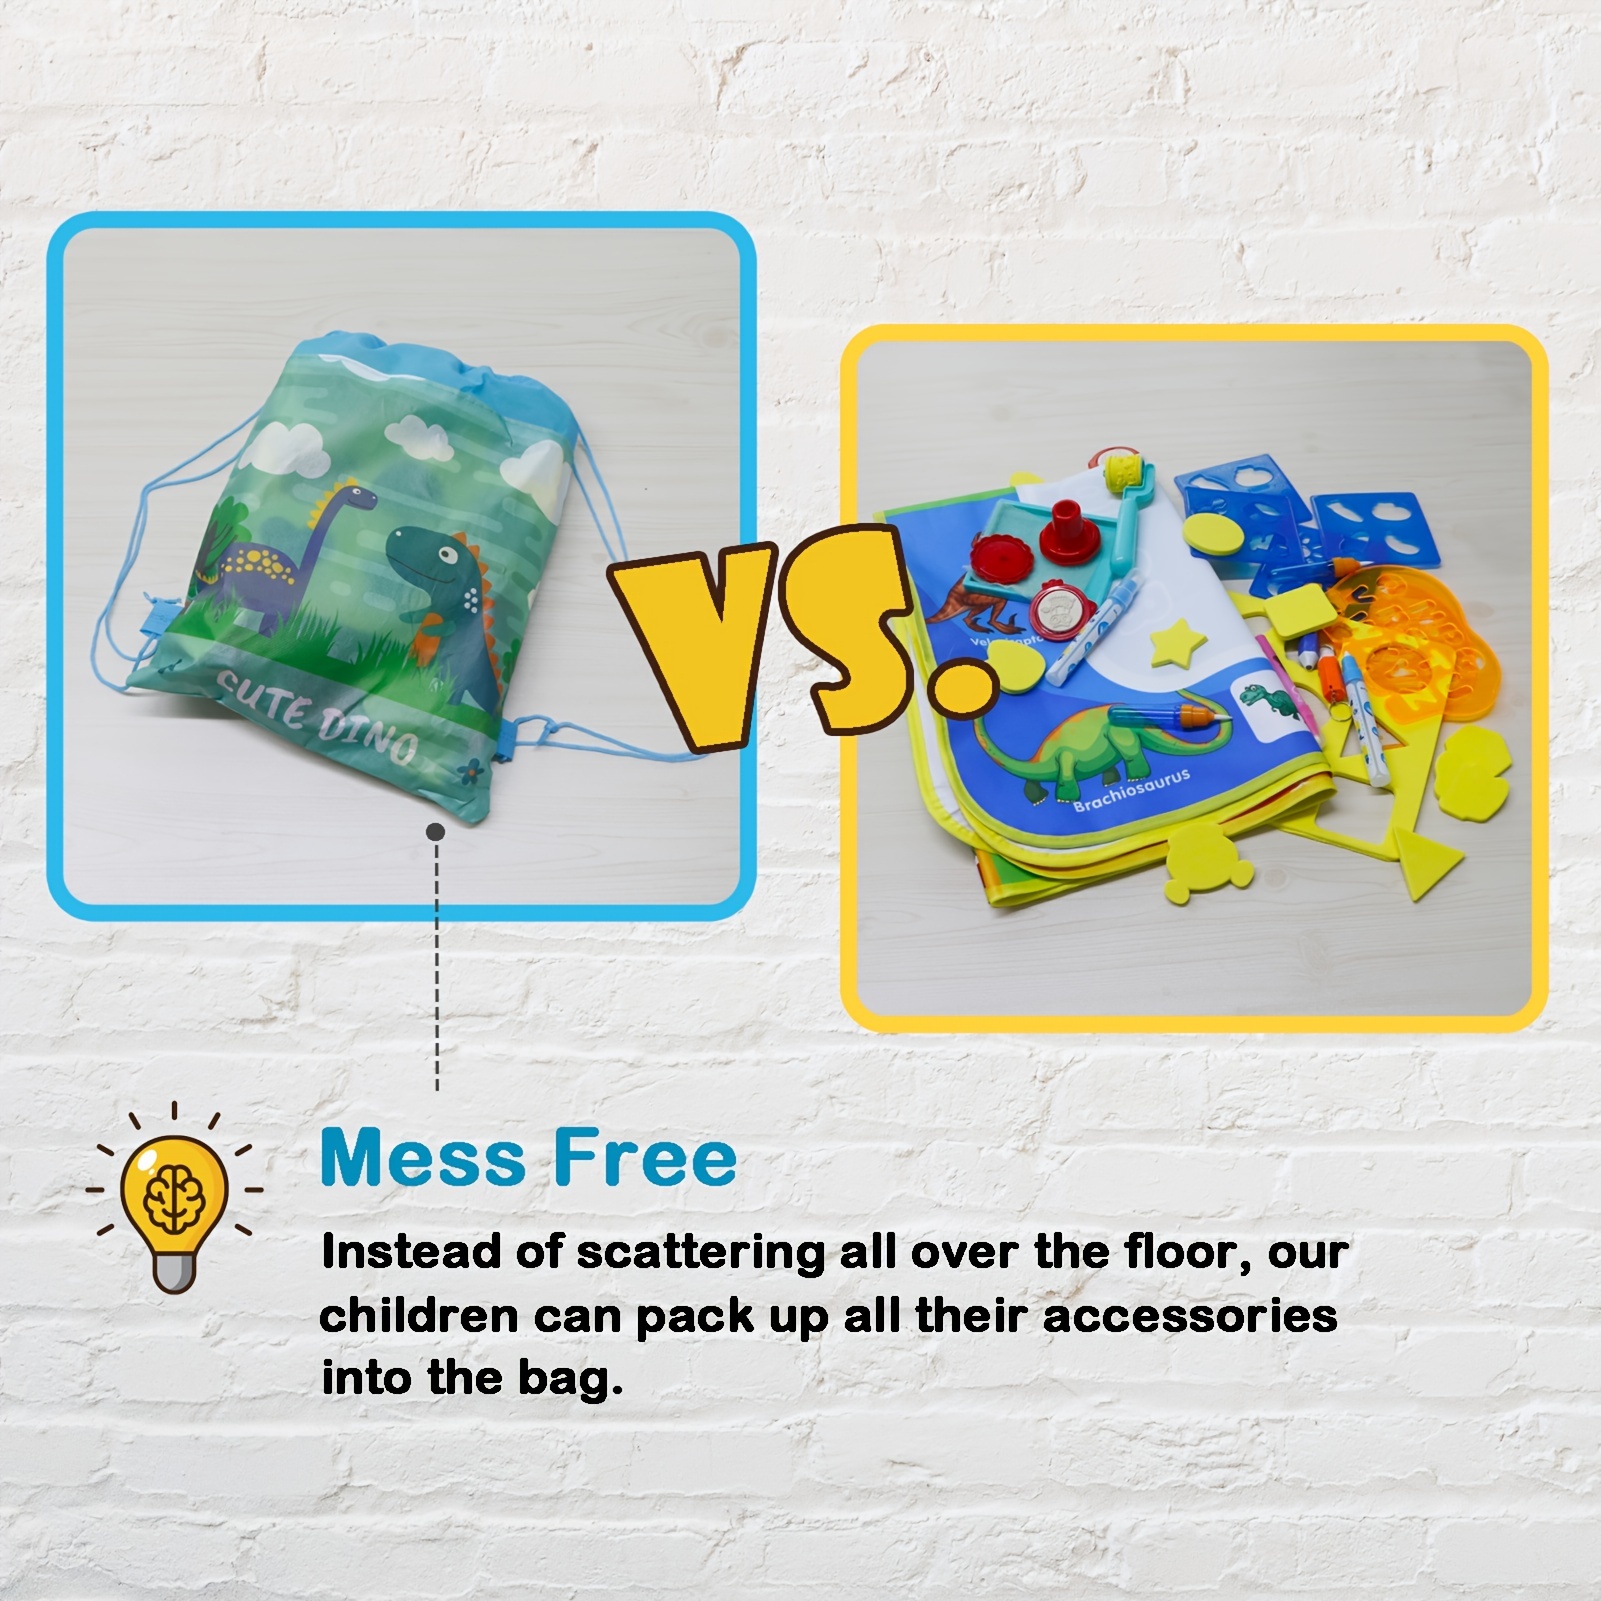 teytoy Water Drawing Mat, 2 Pcs Kids Writing Doodle Painting Board Toy